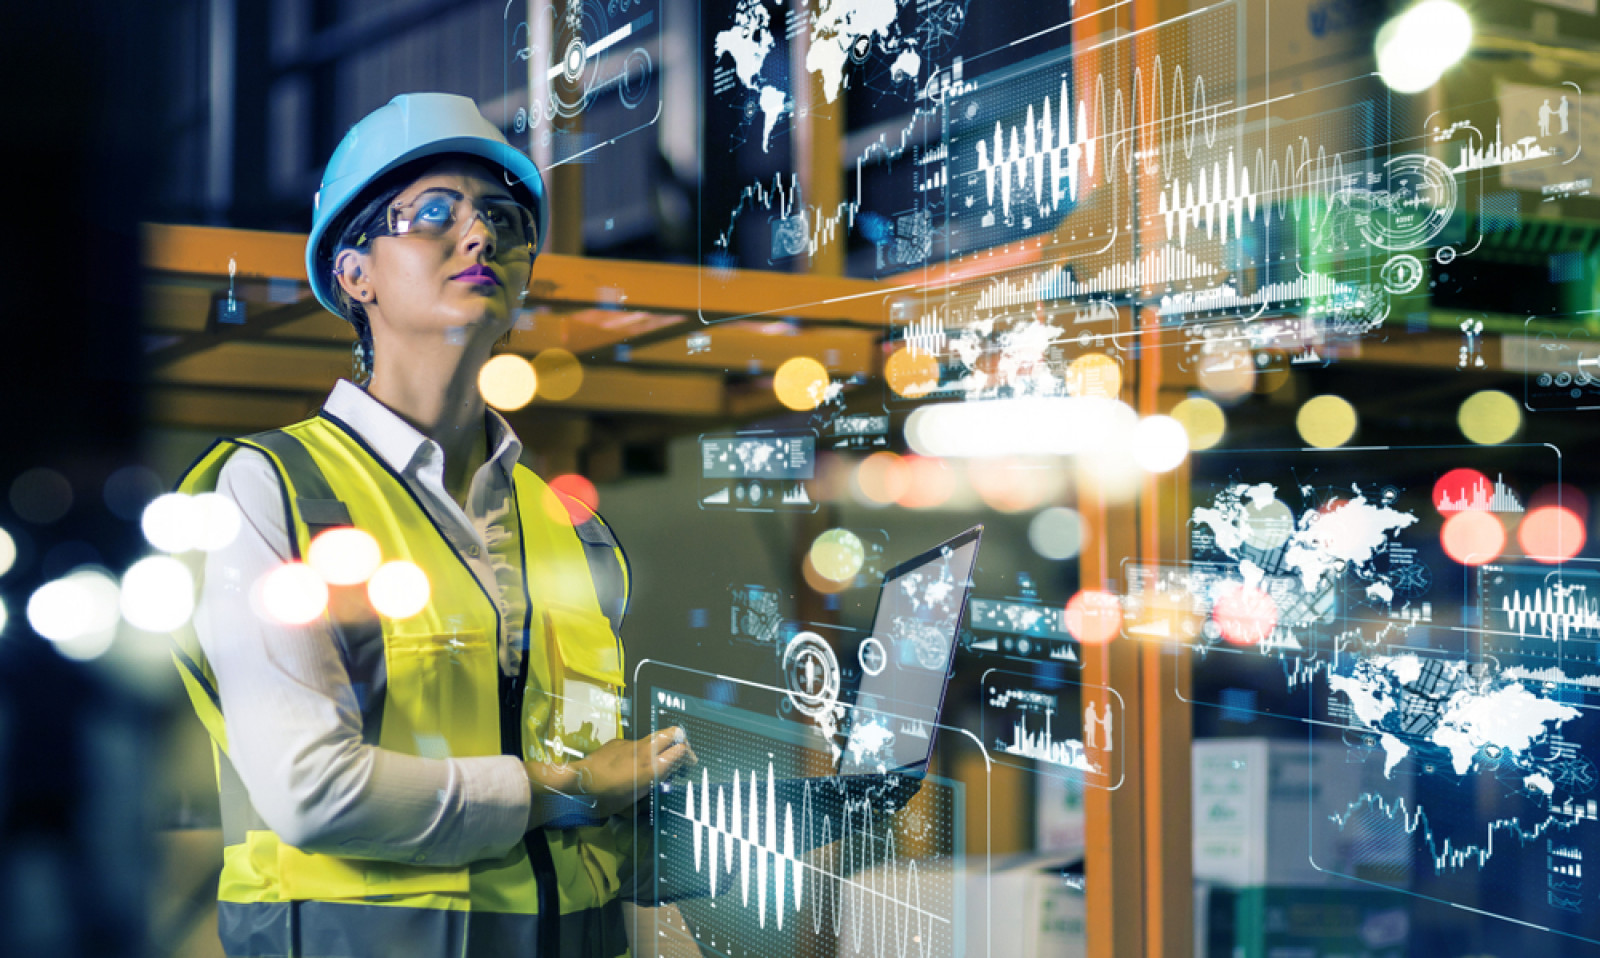 The benefits of achieving real-time manufacturing...